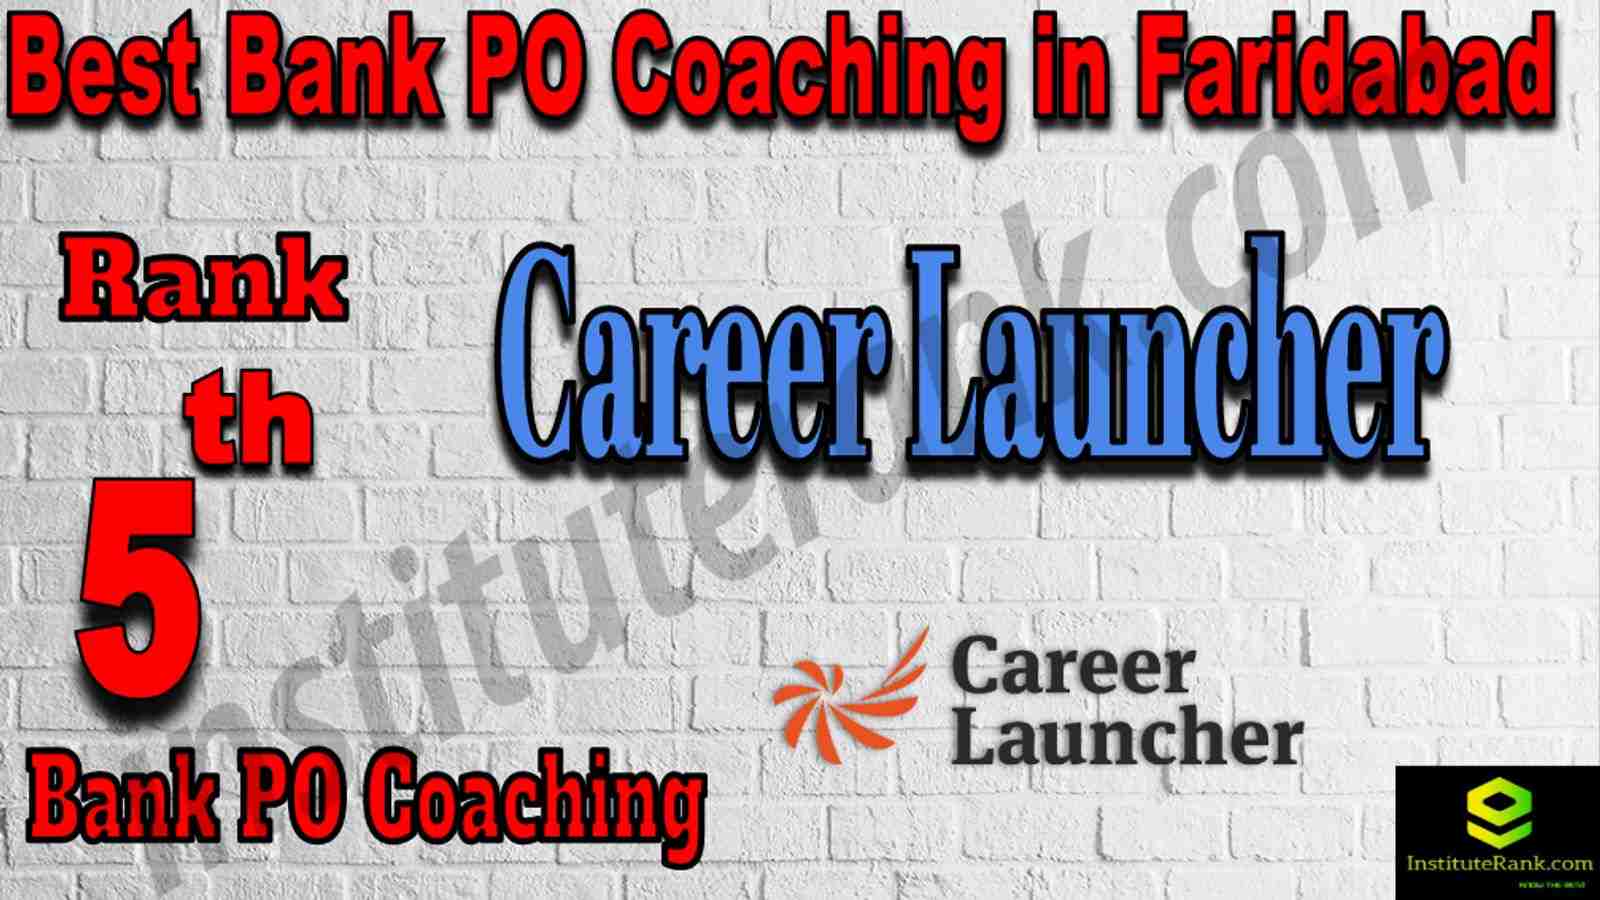 5th Best Bank PO Coaching in Faridabad